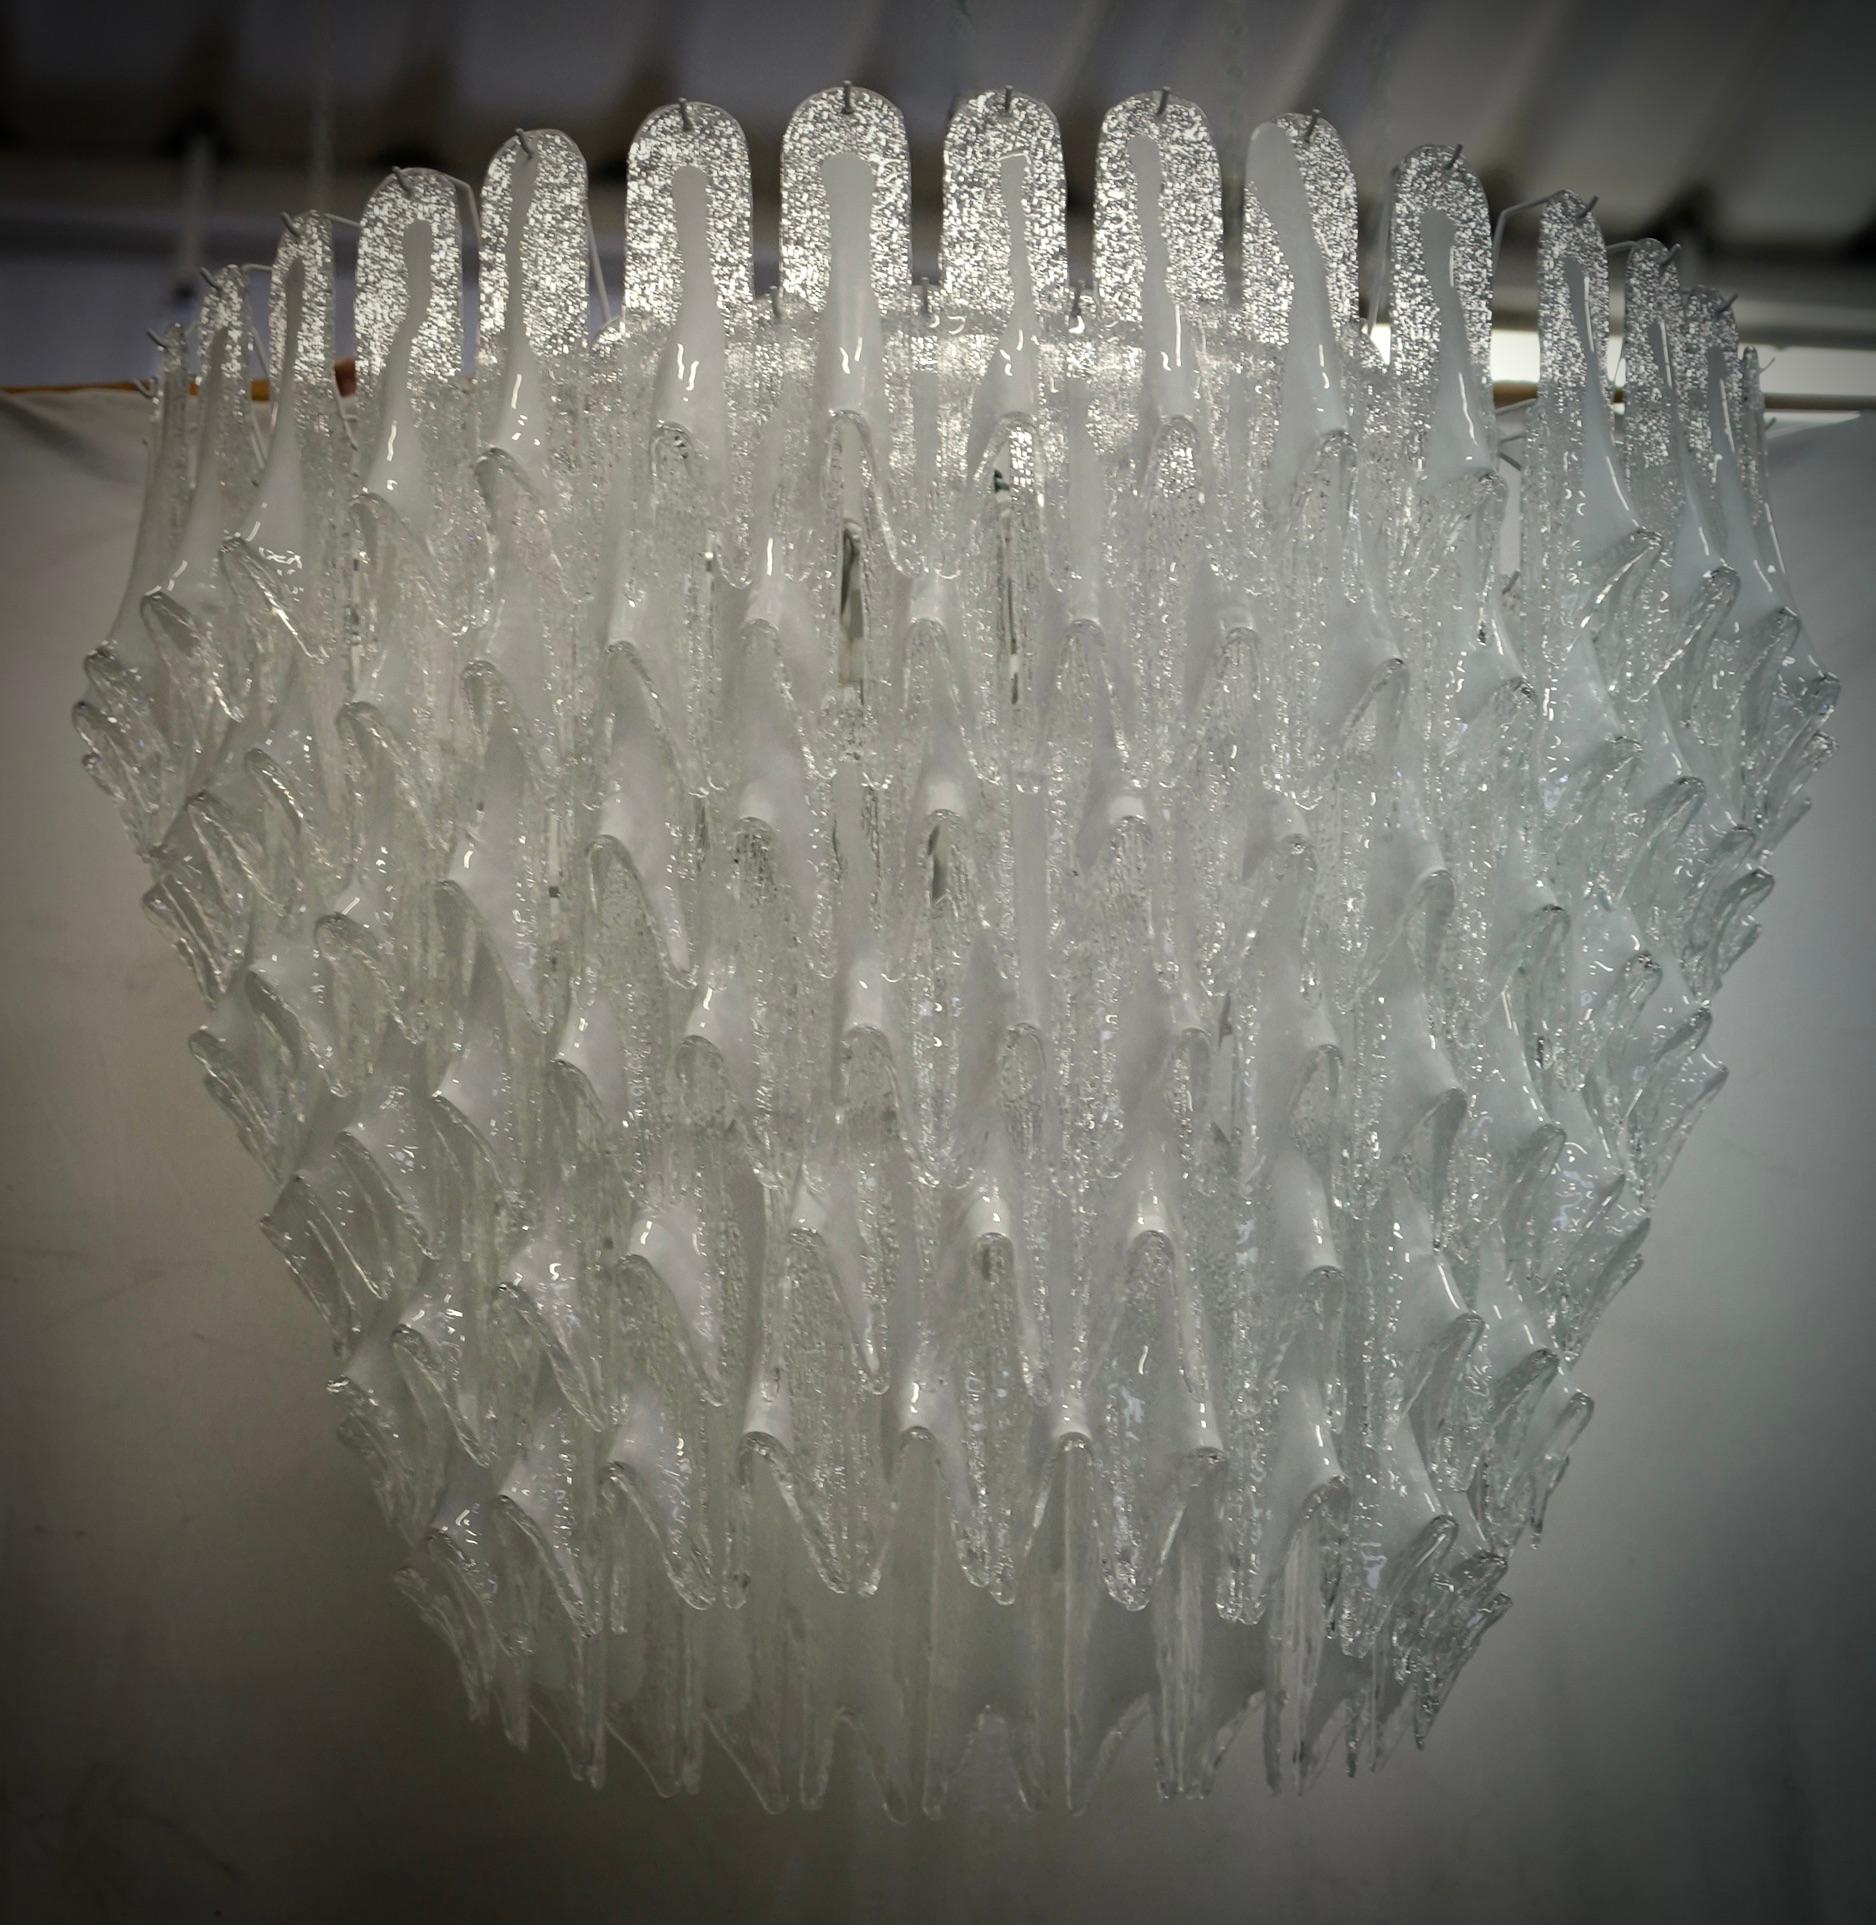 Extraordinary transparent and white color for this Murano chandelier, a strong white color with a unique transparency. Its white color is really guessed for a different and original chandelier from others. A beautiful stain of color above your